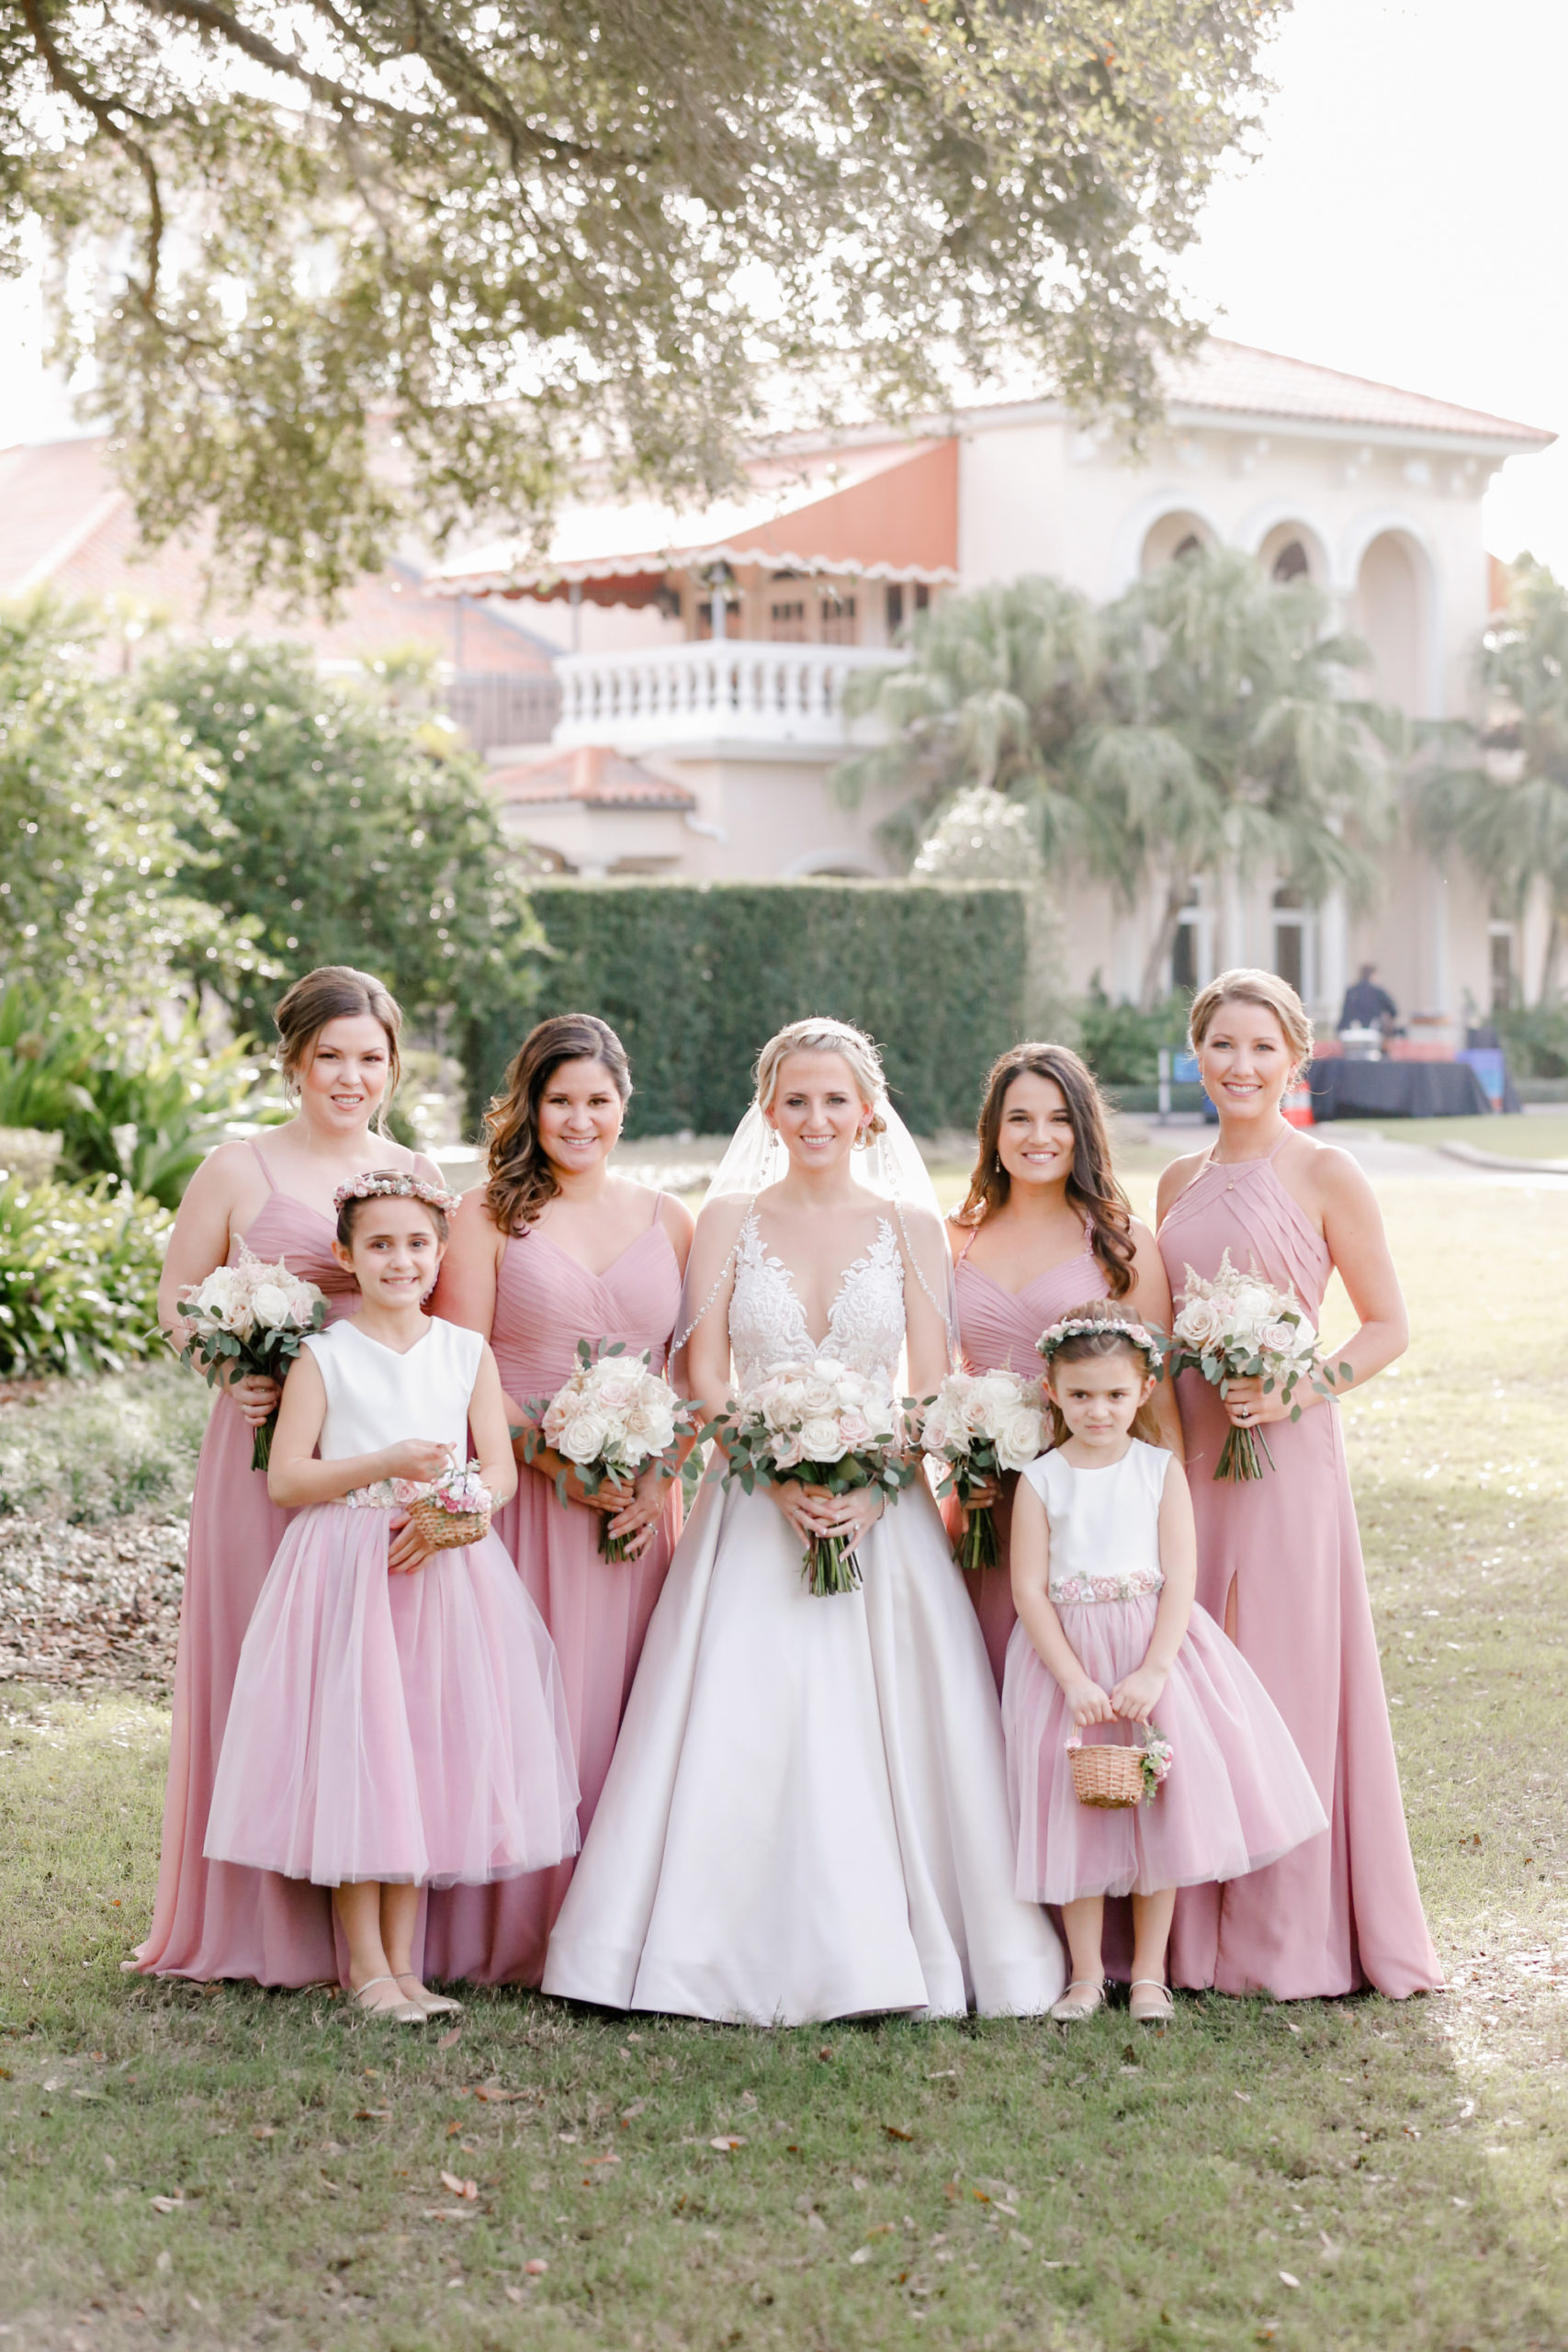 Ballgown Wedding Dress with Lace Illusion Neckline | Blush Pink Dusty Rose Mismatched Bridesmaid Dresses